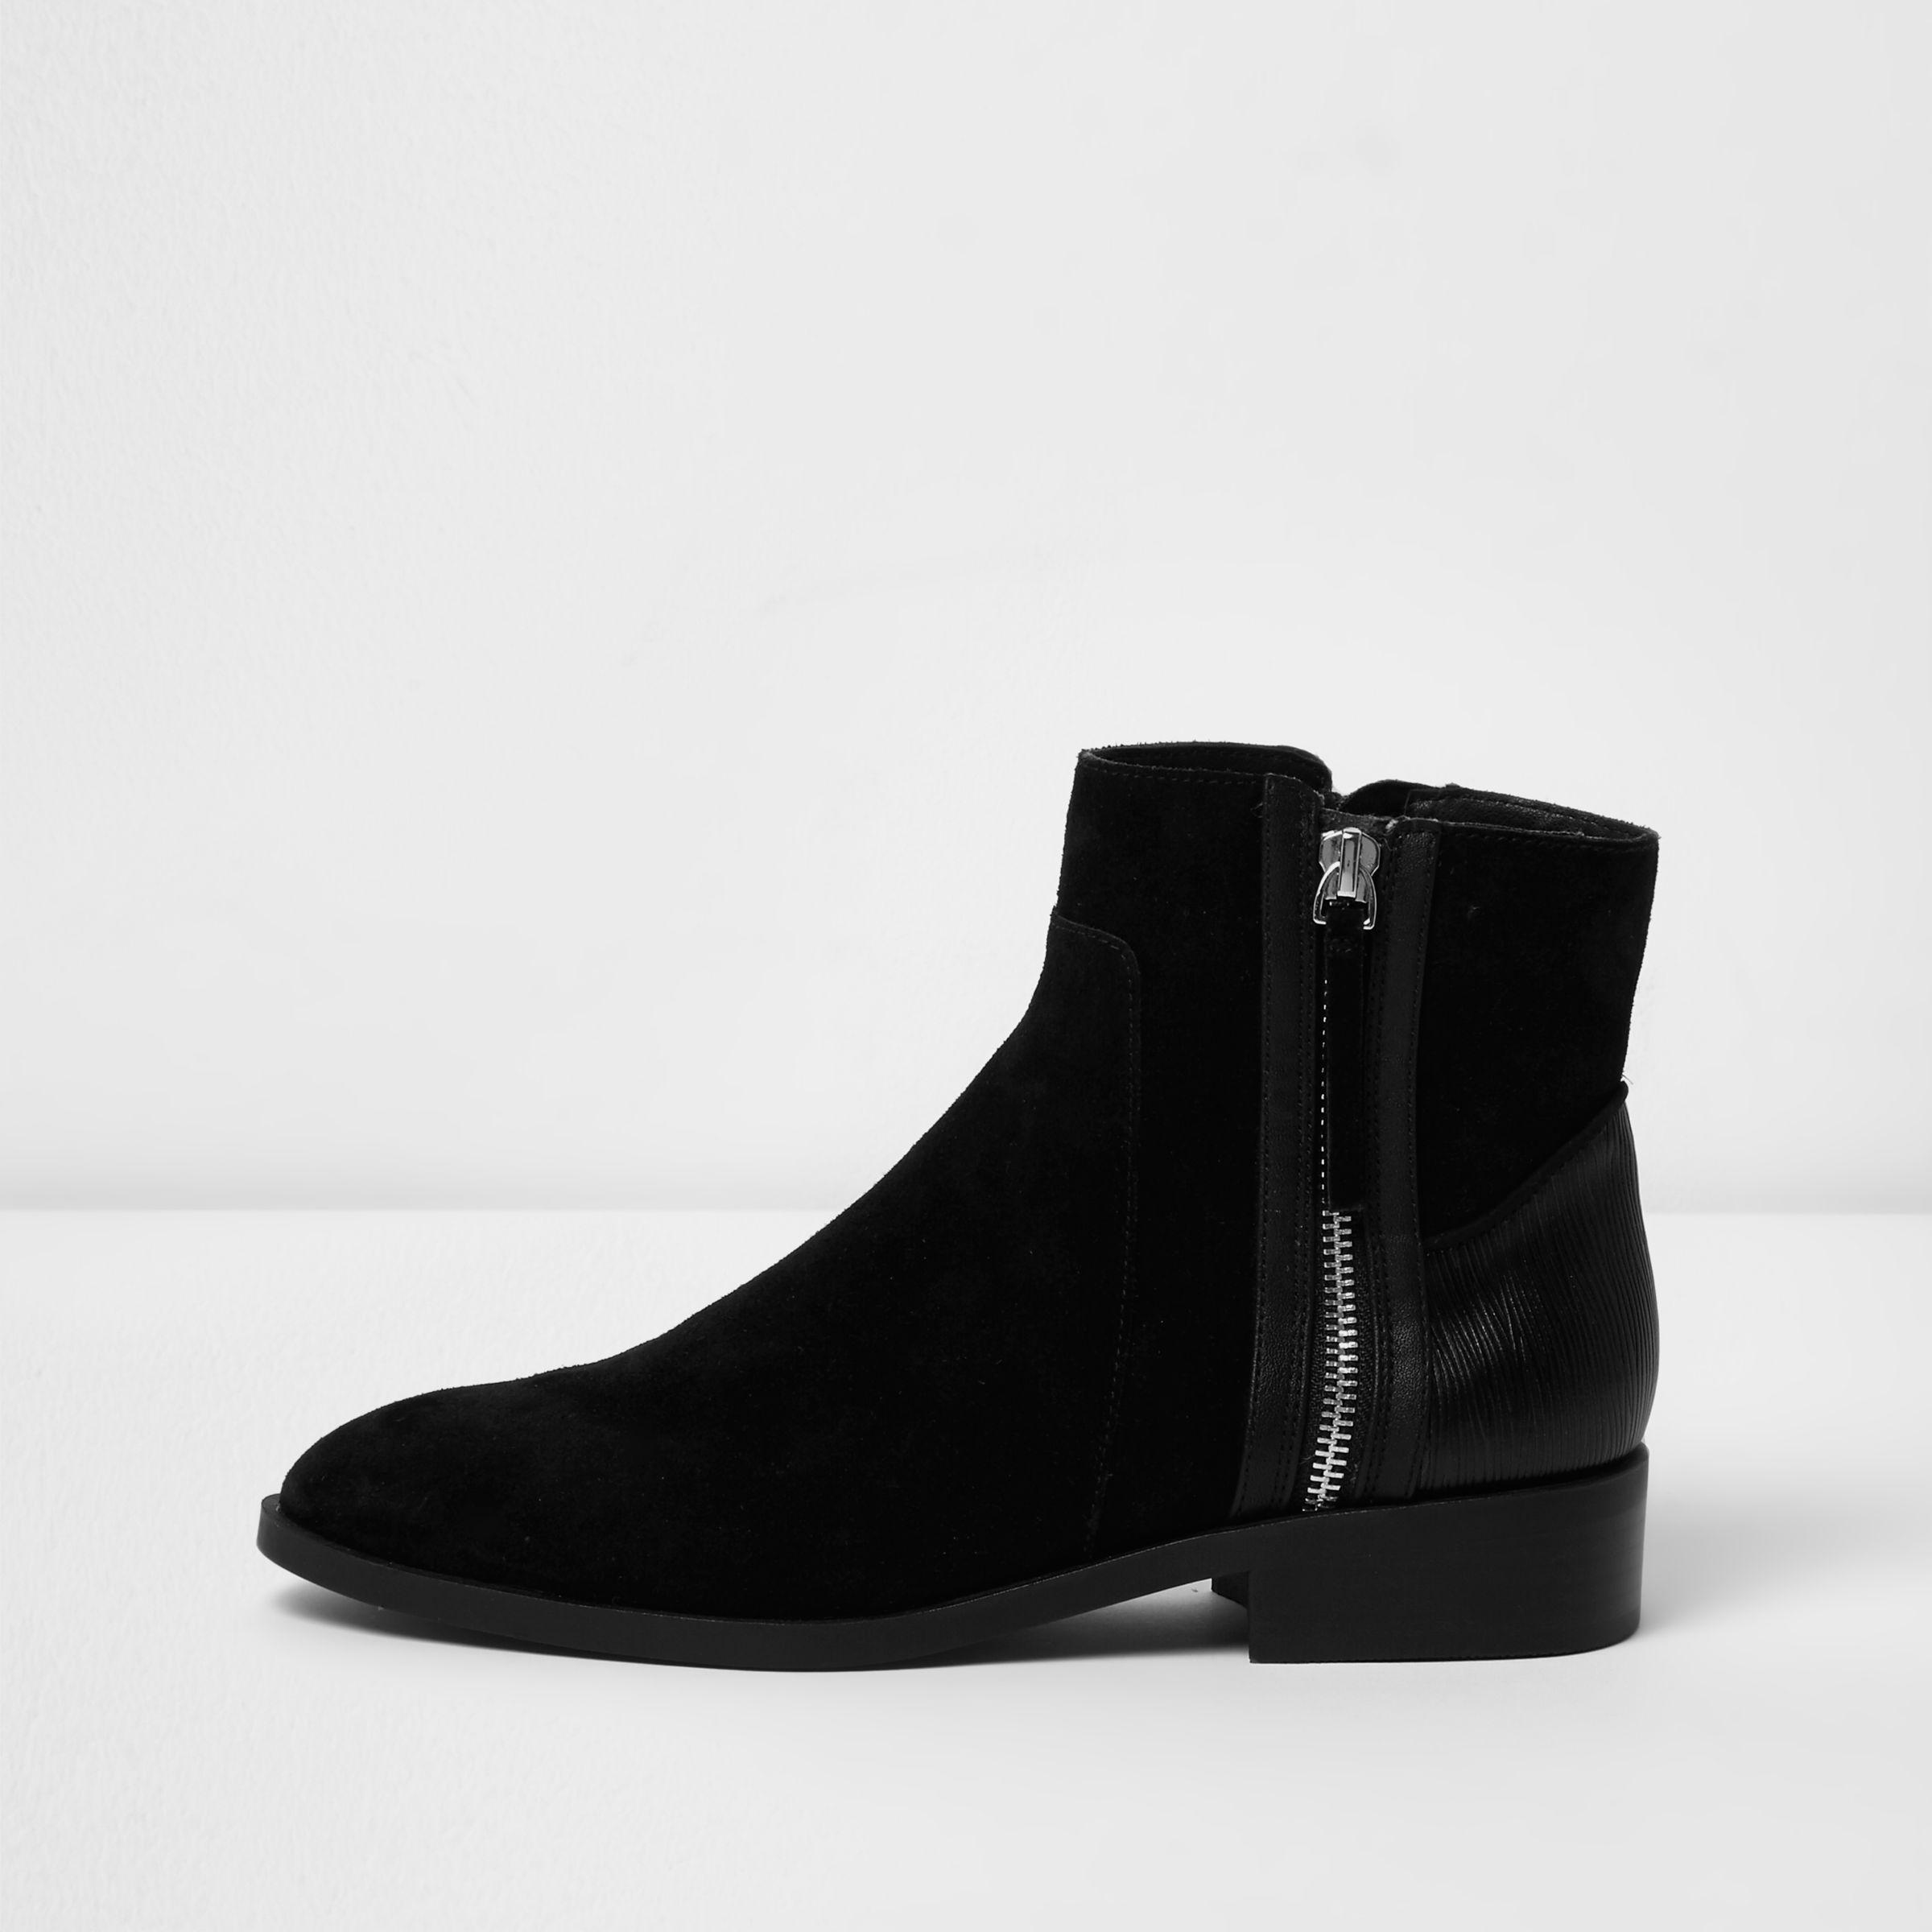 River Island Black Suede Zip Side Ankle Boots - Lyst